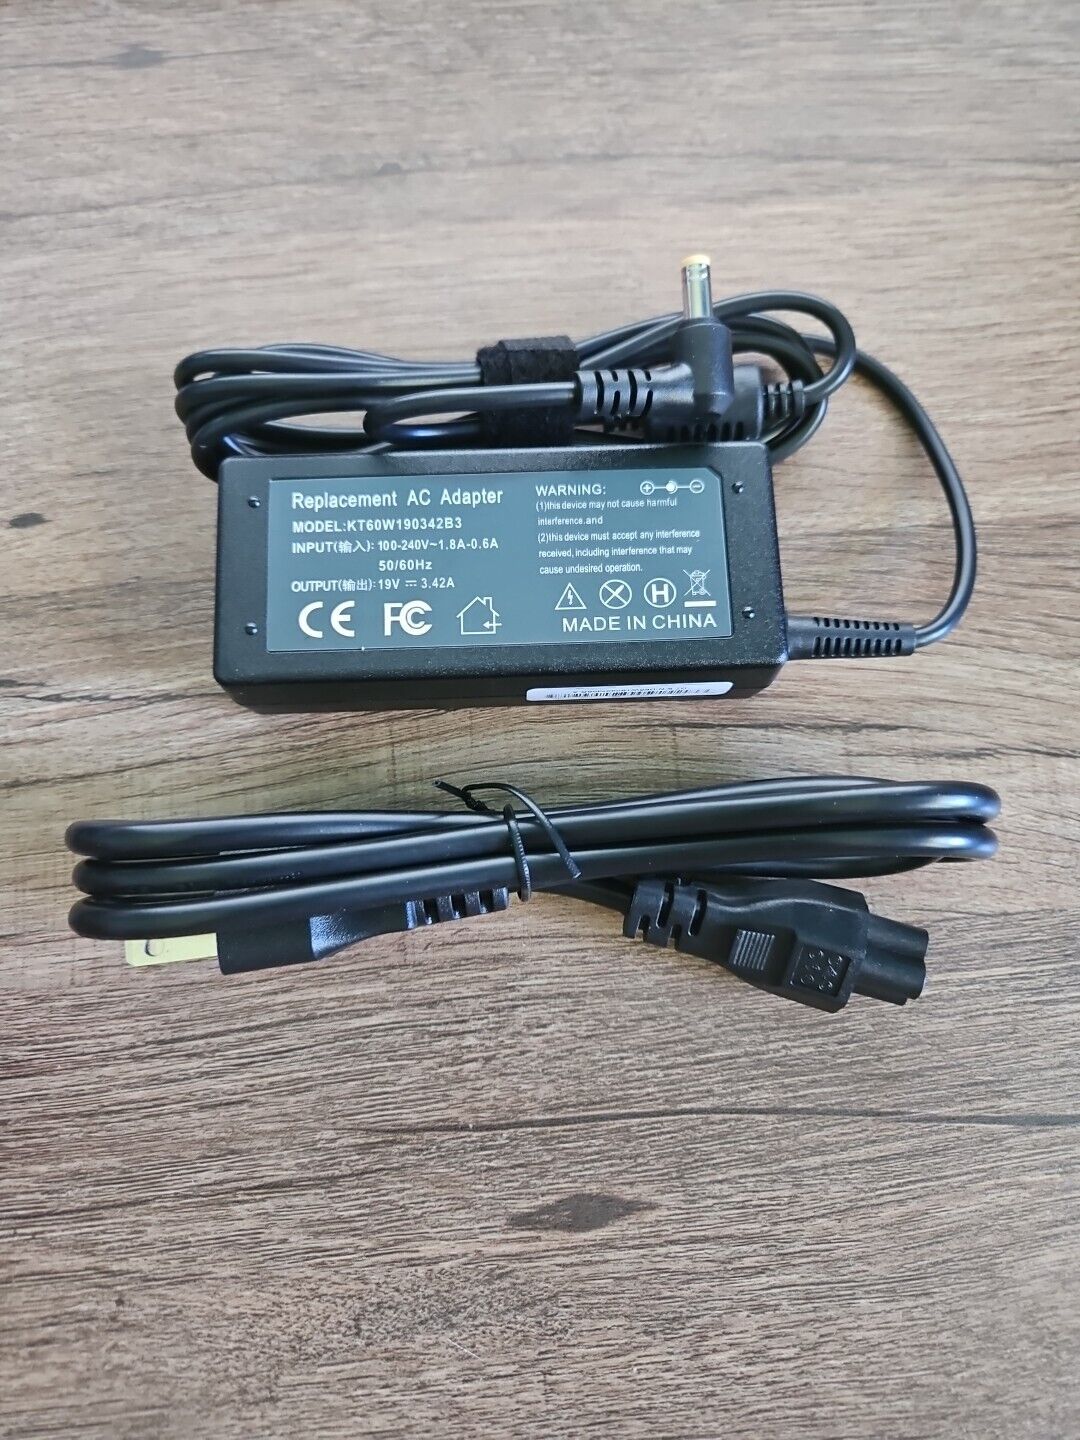 Replacement AC Adapter Model KT60W190342B3 100-240V -1.8A-0.6A 19V 3.42A